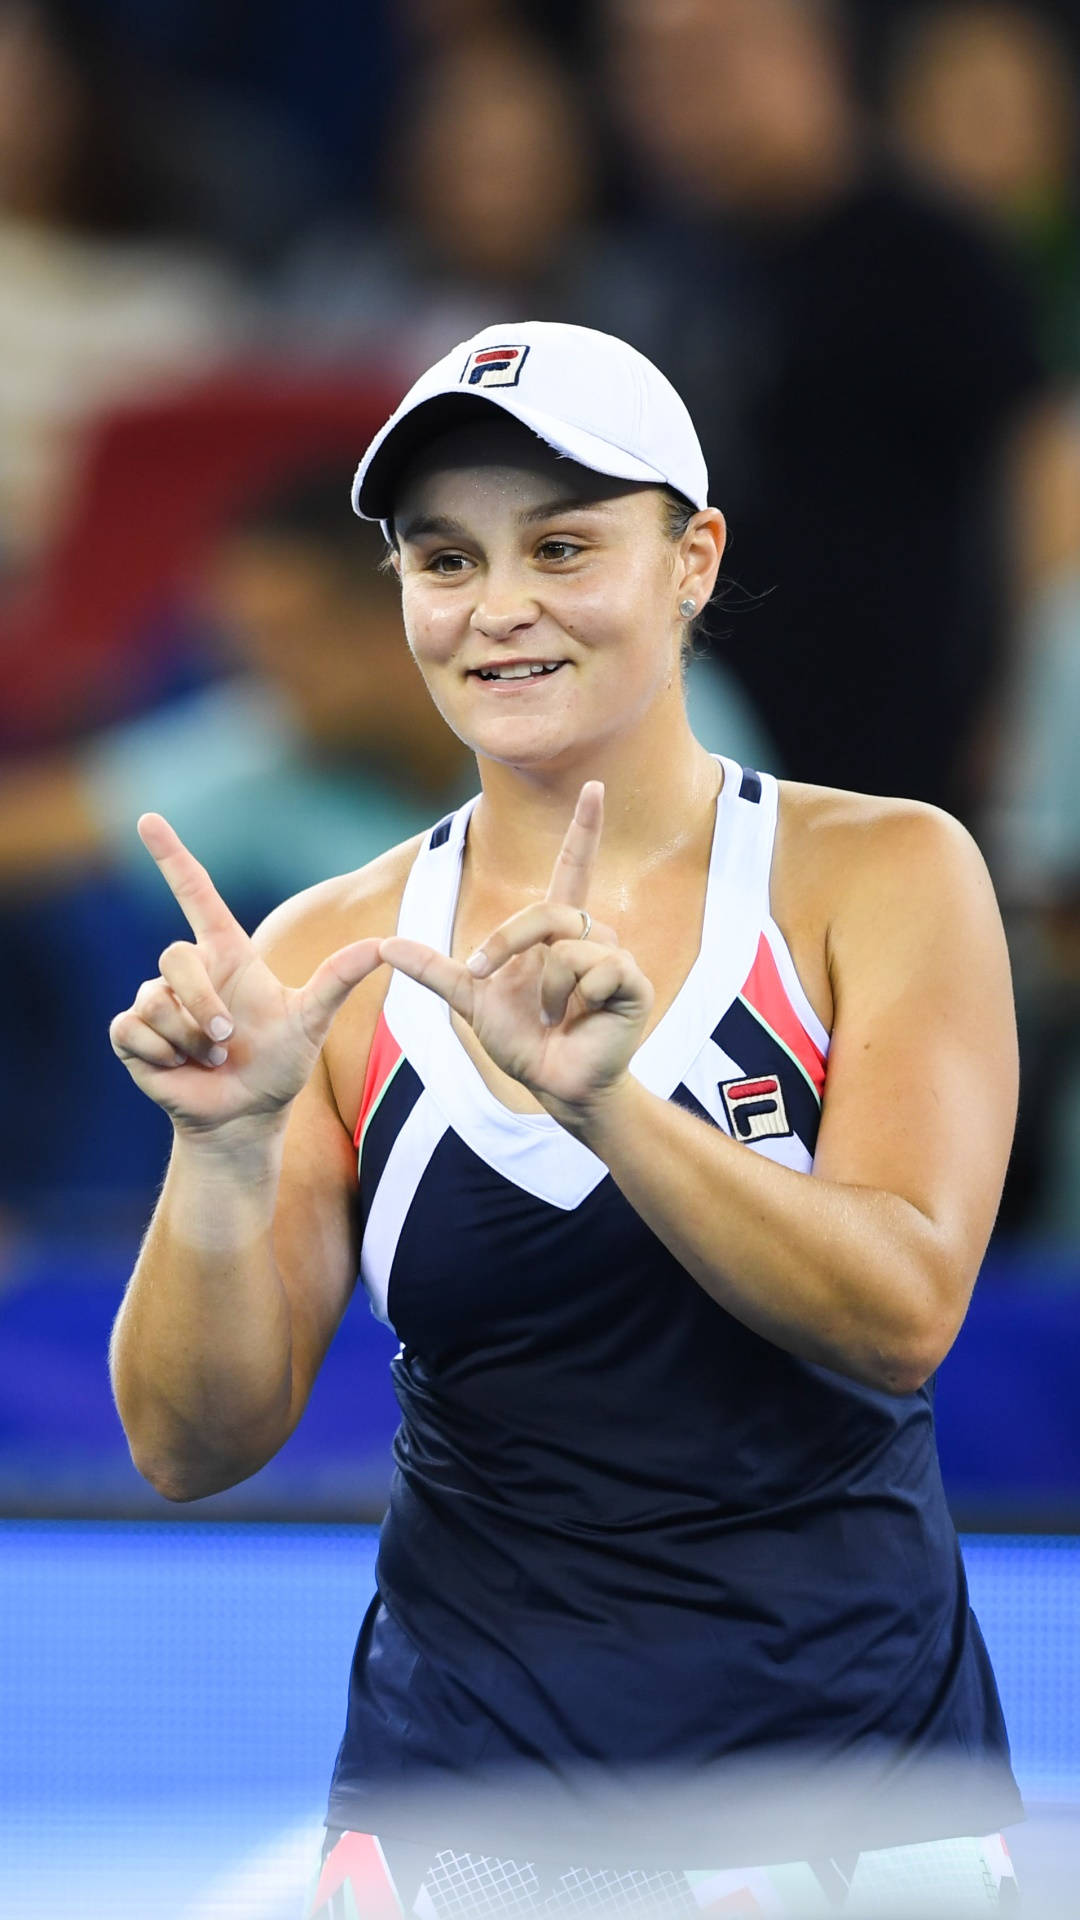 Ashleigh Barty Making “w” Sign Wallpaper